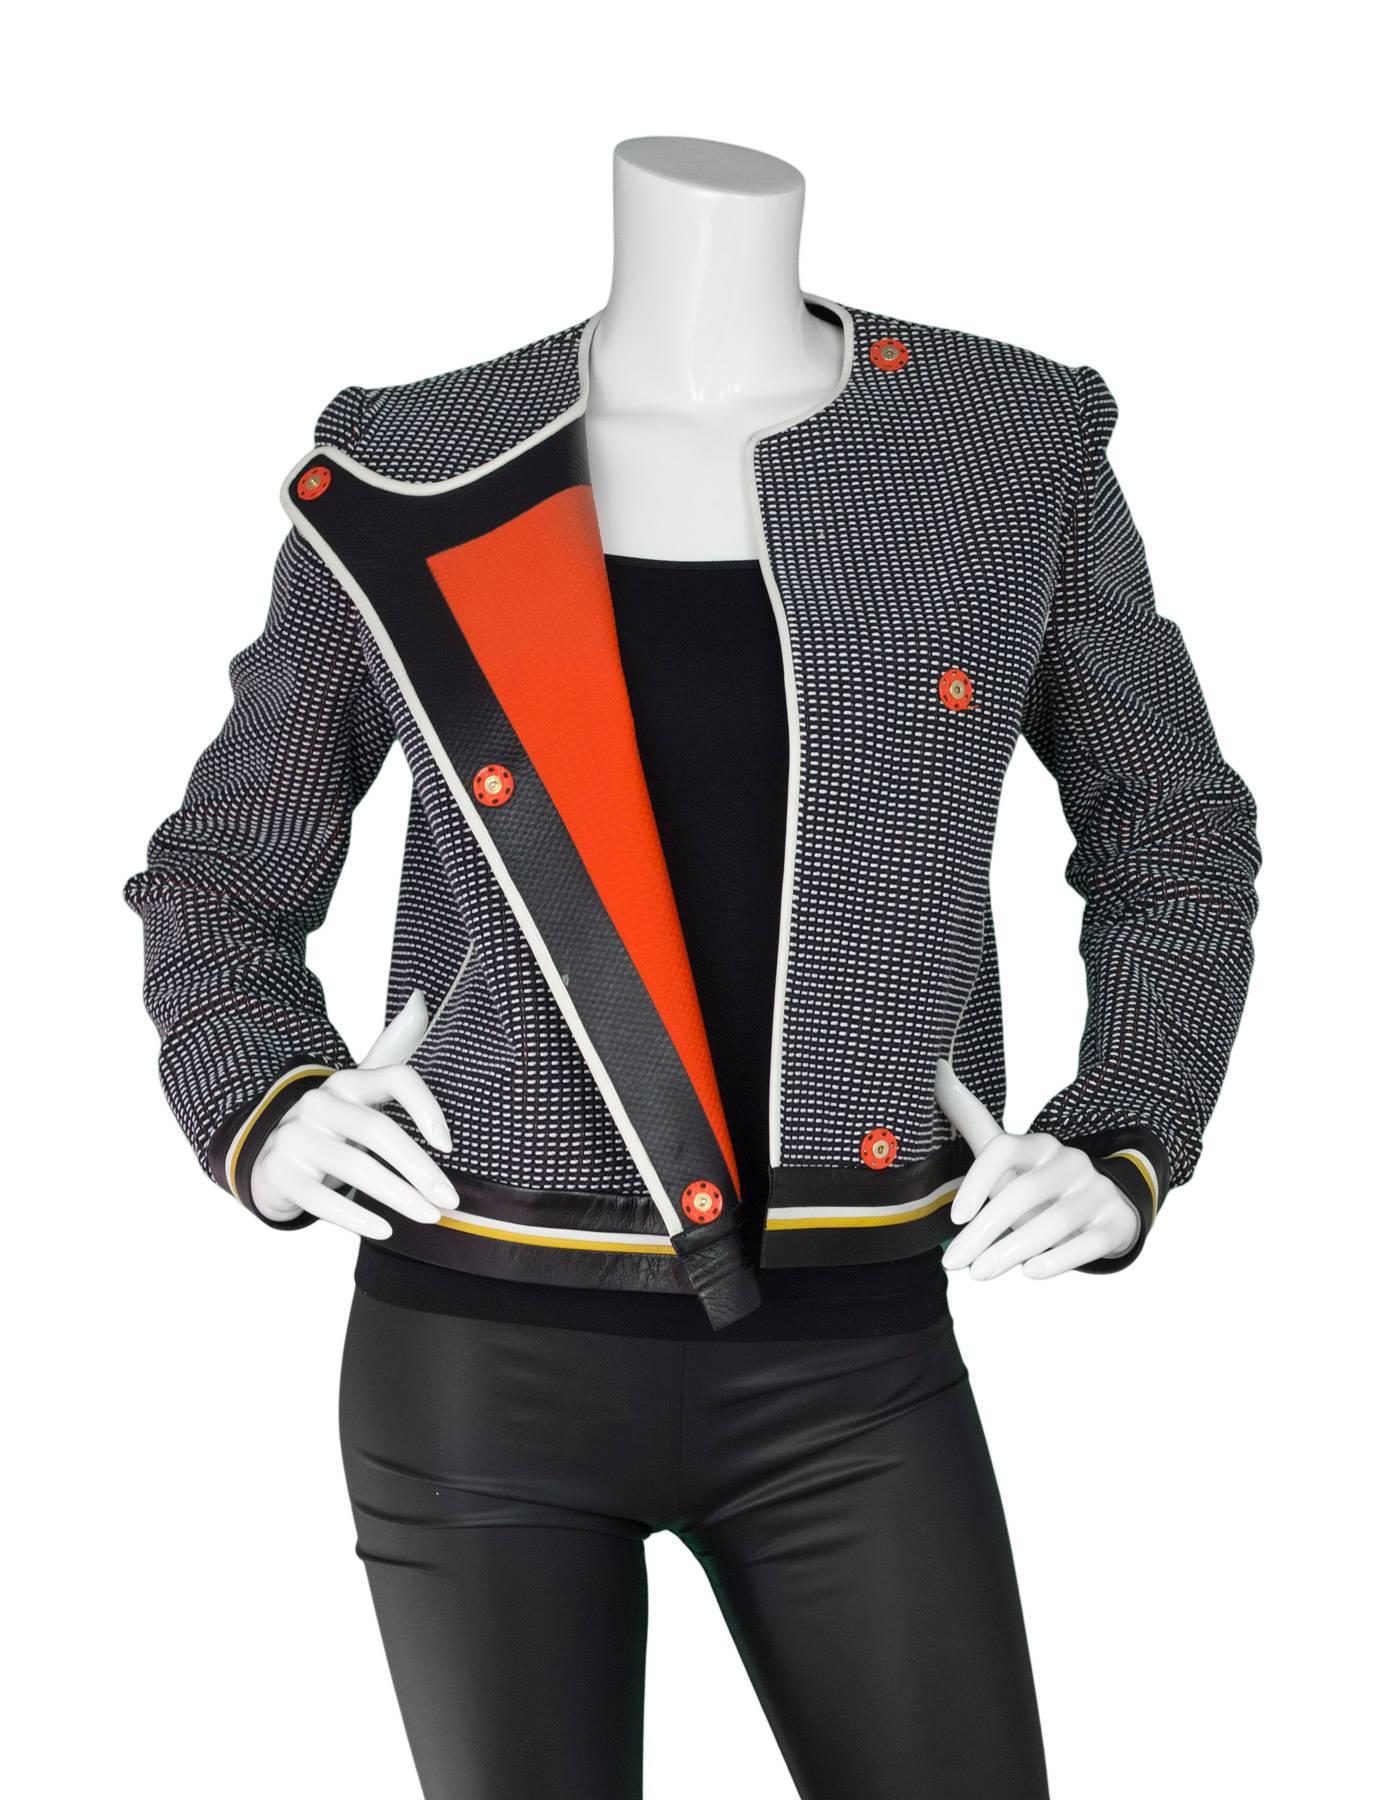 Fendi Navy Black & White Knit Jacket 
Features White leather piping, yellow, black and white striped leather trim and hemline of jacket and orange accents

Made In: Italy
Color: Black, white, navy, orange and yellow
Composition: 60% cotton, 32%